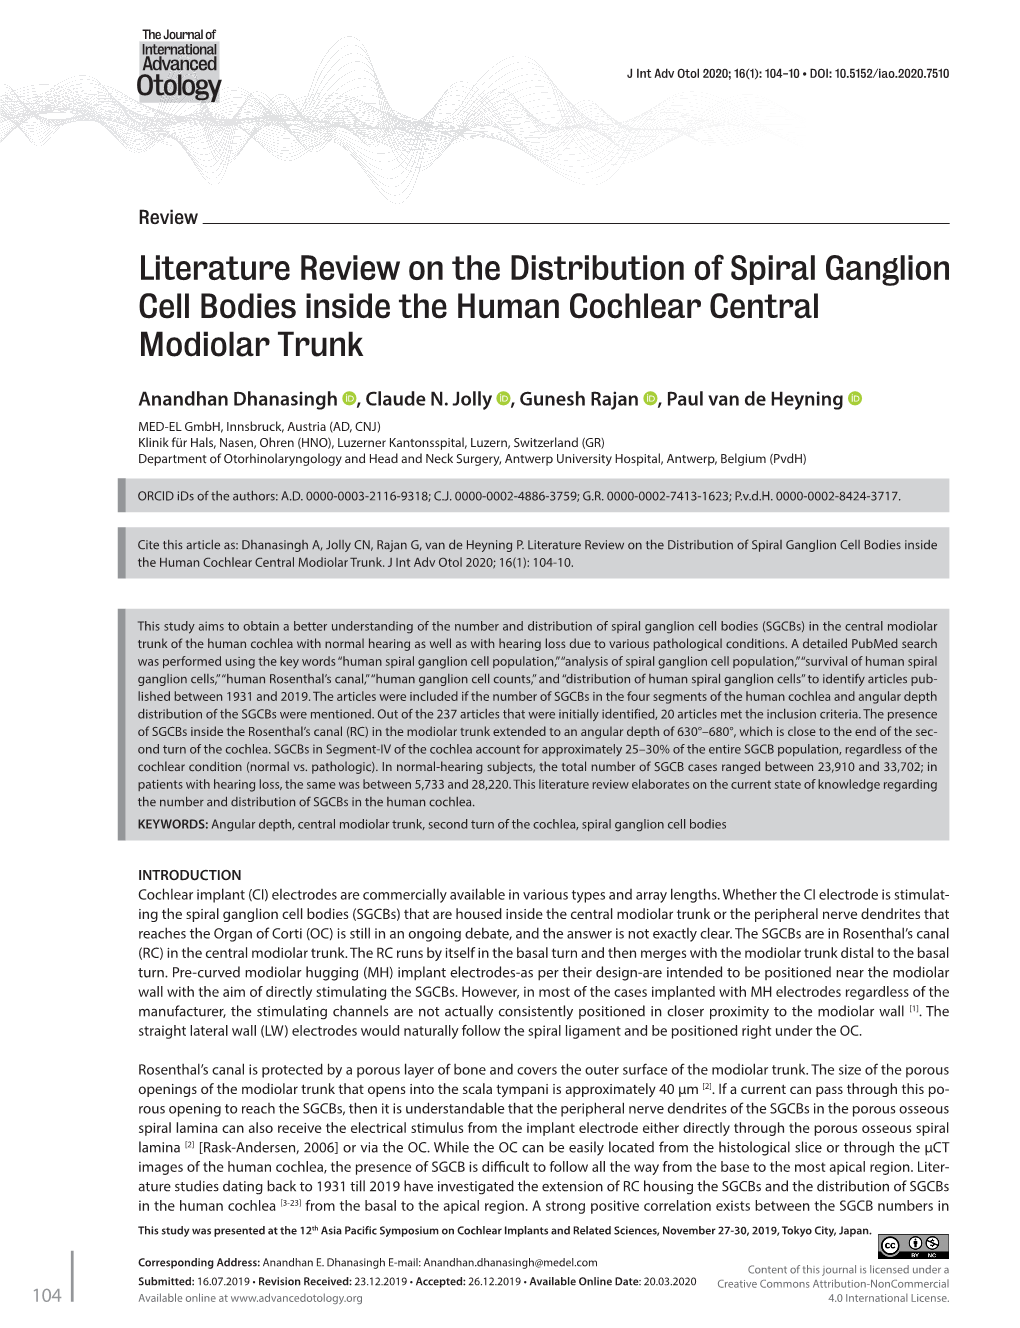 Literature Review on the Distribution of Spiral Ganglion Cell Bodies Inside the Human Cochlear Central Modiolar Trunk